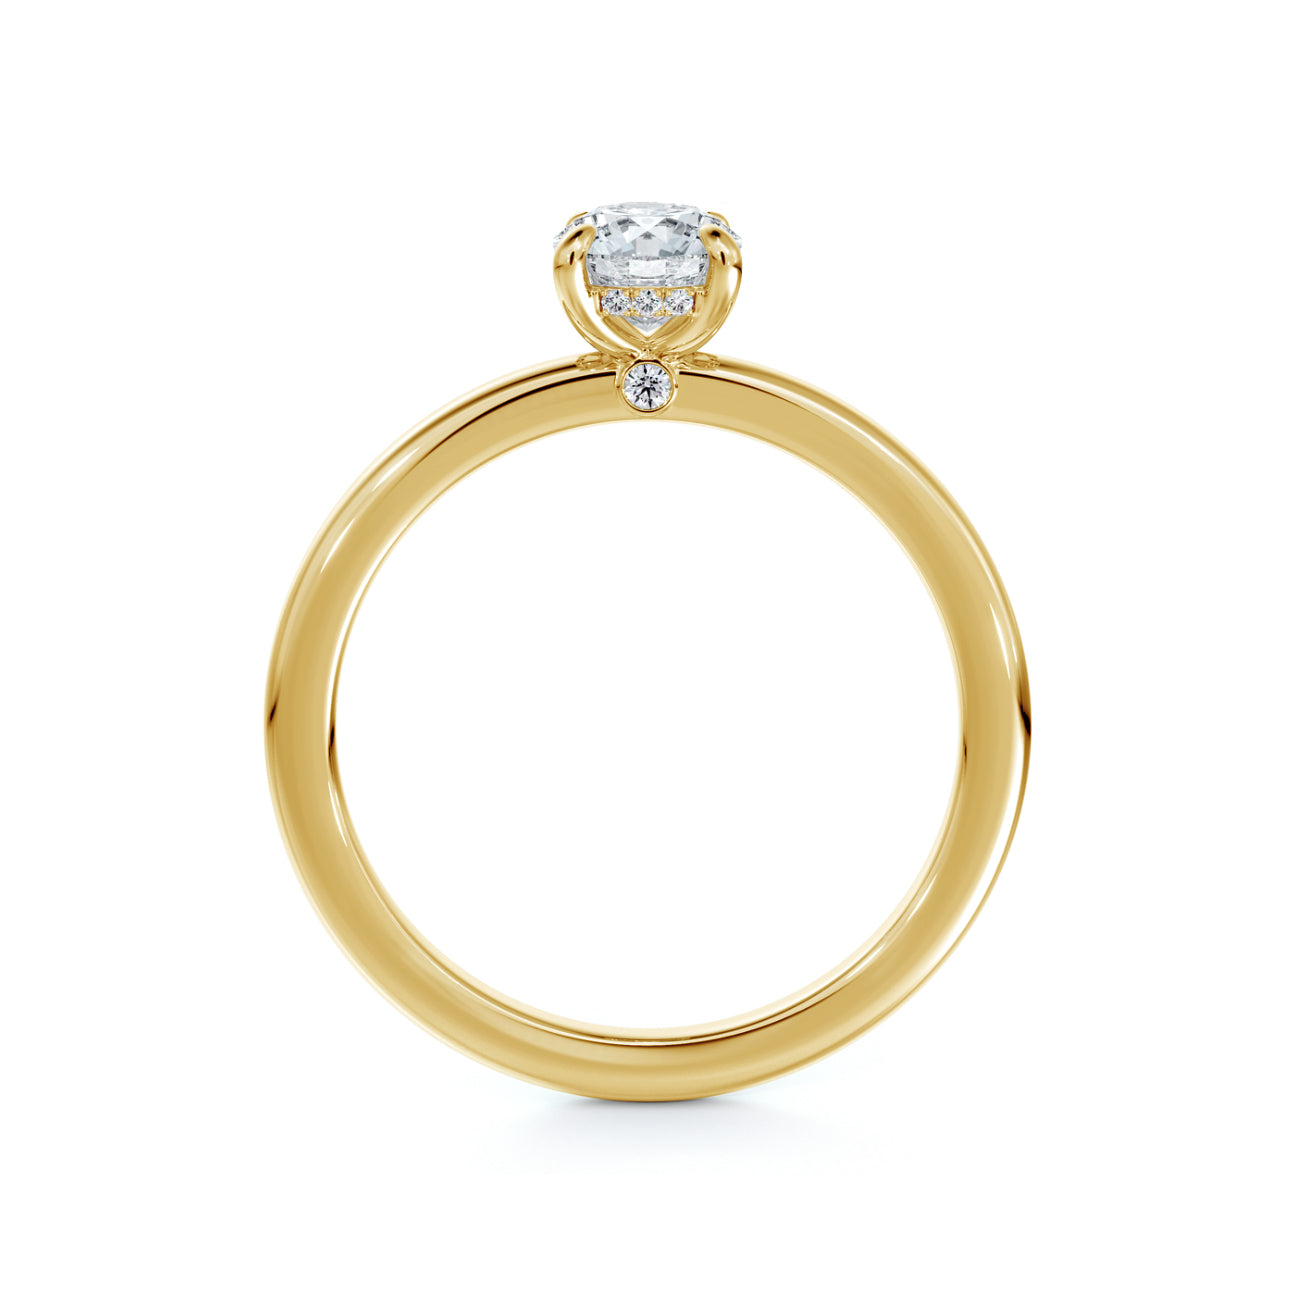 De Beers Forevermark Micaela's Solitaire Cushion Brilliant Engagement Ring